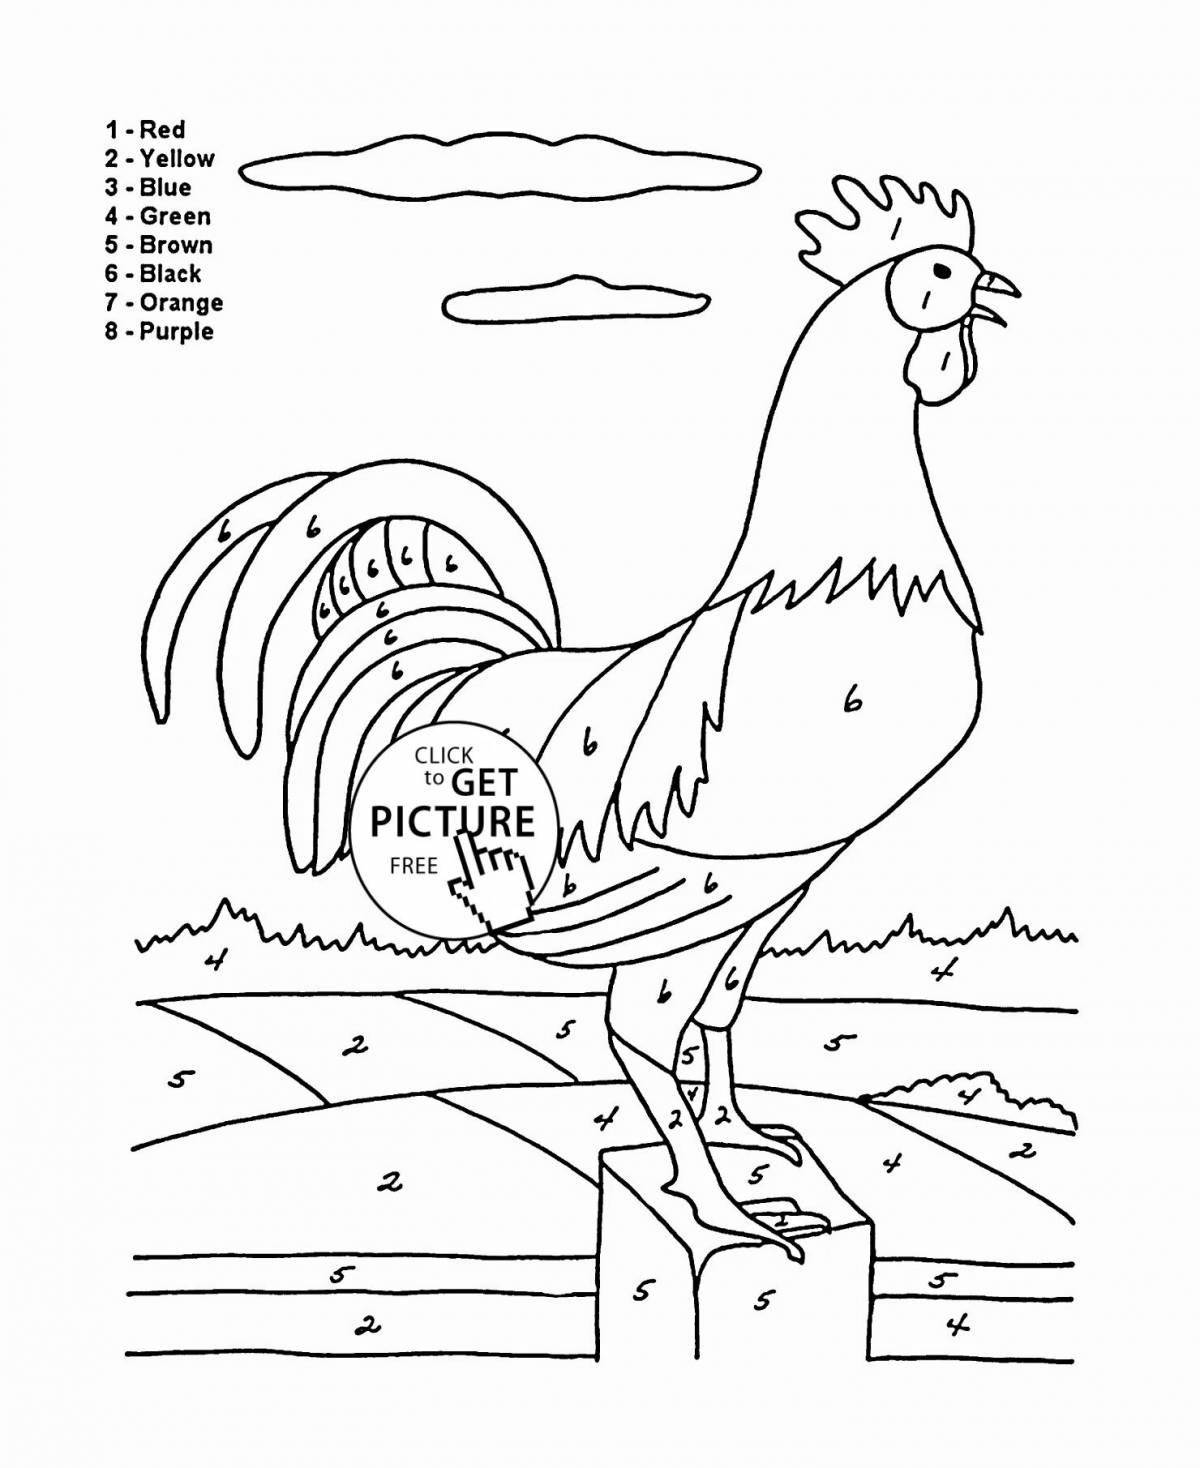 Exciting bird coloring page for 5-6 year olds